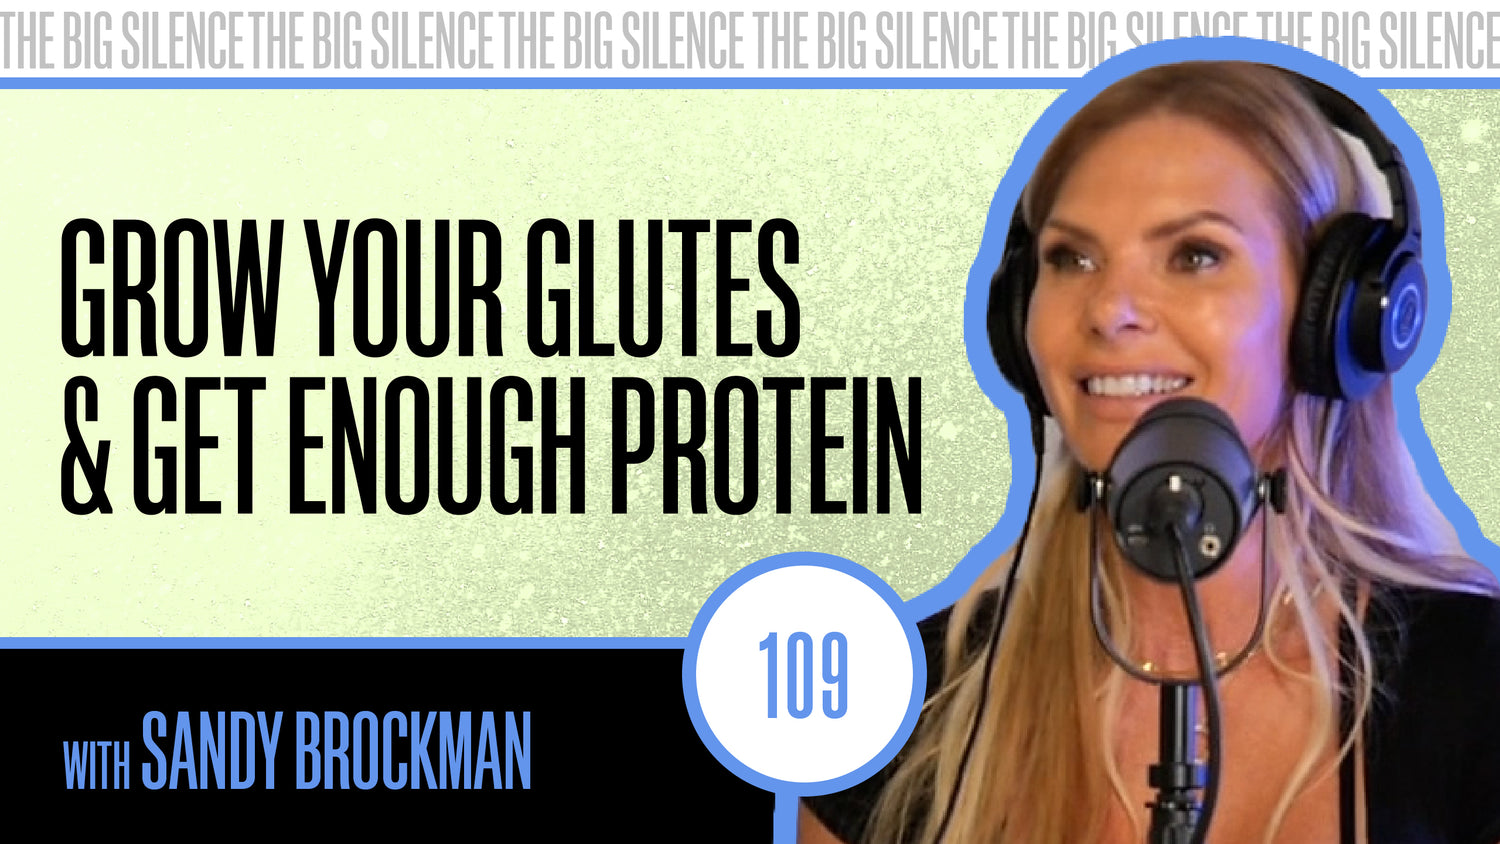 109. SECRETS TO GROWING GLUTES, PROTEIN INTAKE & SUPPORTING YOUR BODY THROUGH MENOPAUSE WITH ELITE TRAINER SANDY BROCKMAN